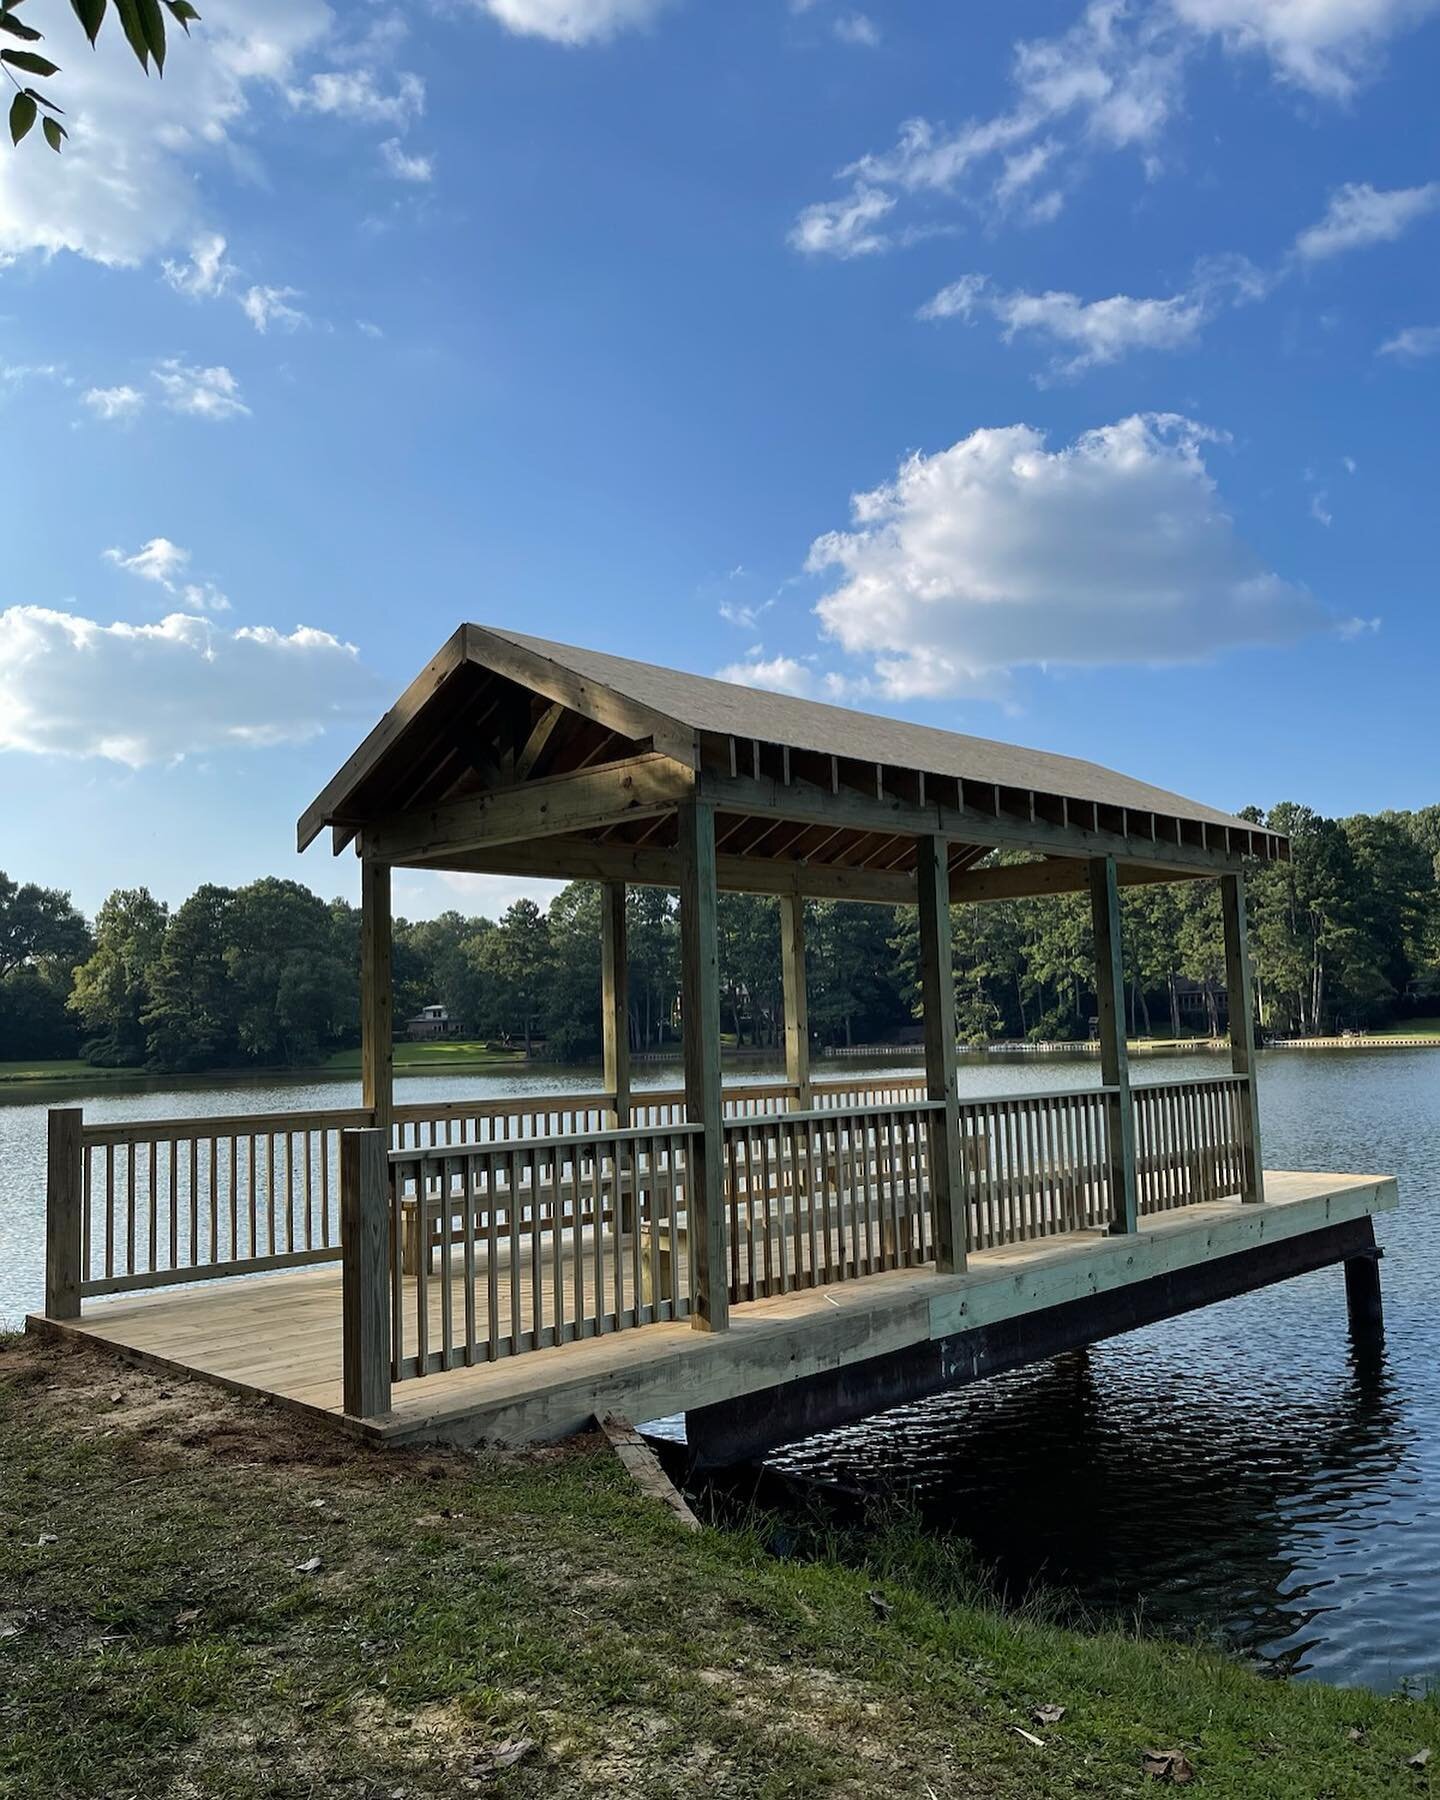 🌊 Dockside dreams in Atlanta 🌊

Our pressure-treated wood stands strong, creating the perfect lake escape. 

Come in today or give us a call at 770-779-8988 and let our team help you with all your lumber needs!